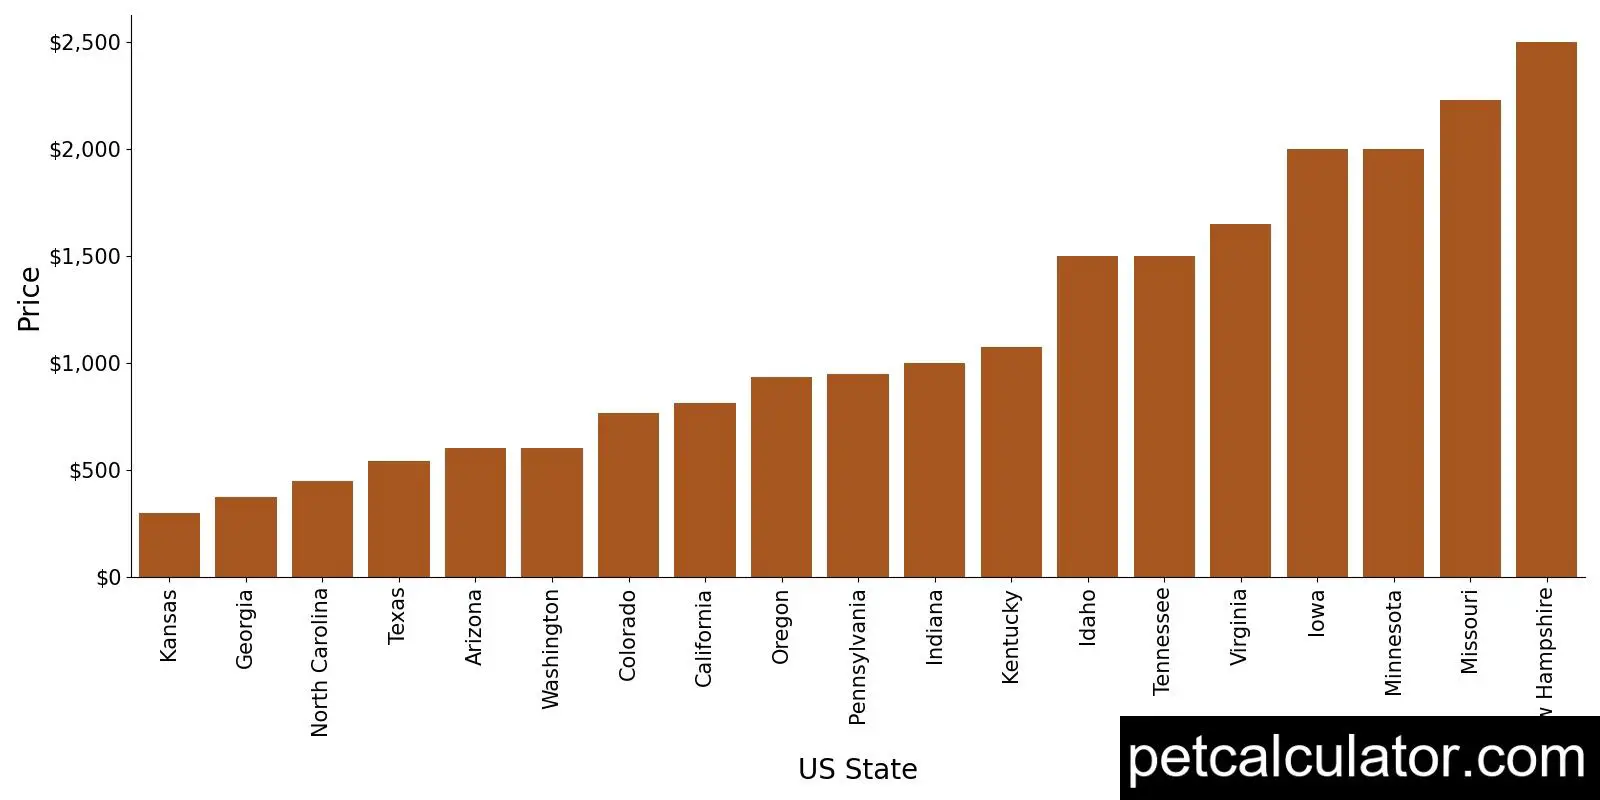 Price of Belgian Sheepdog by US State 